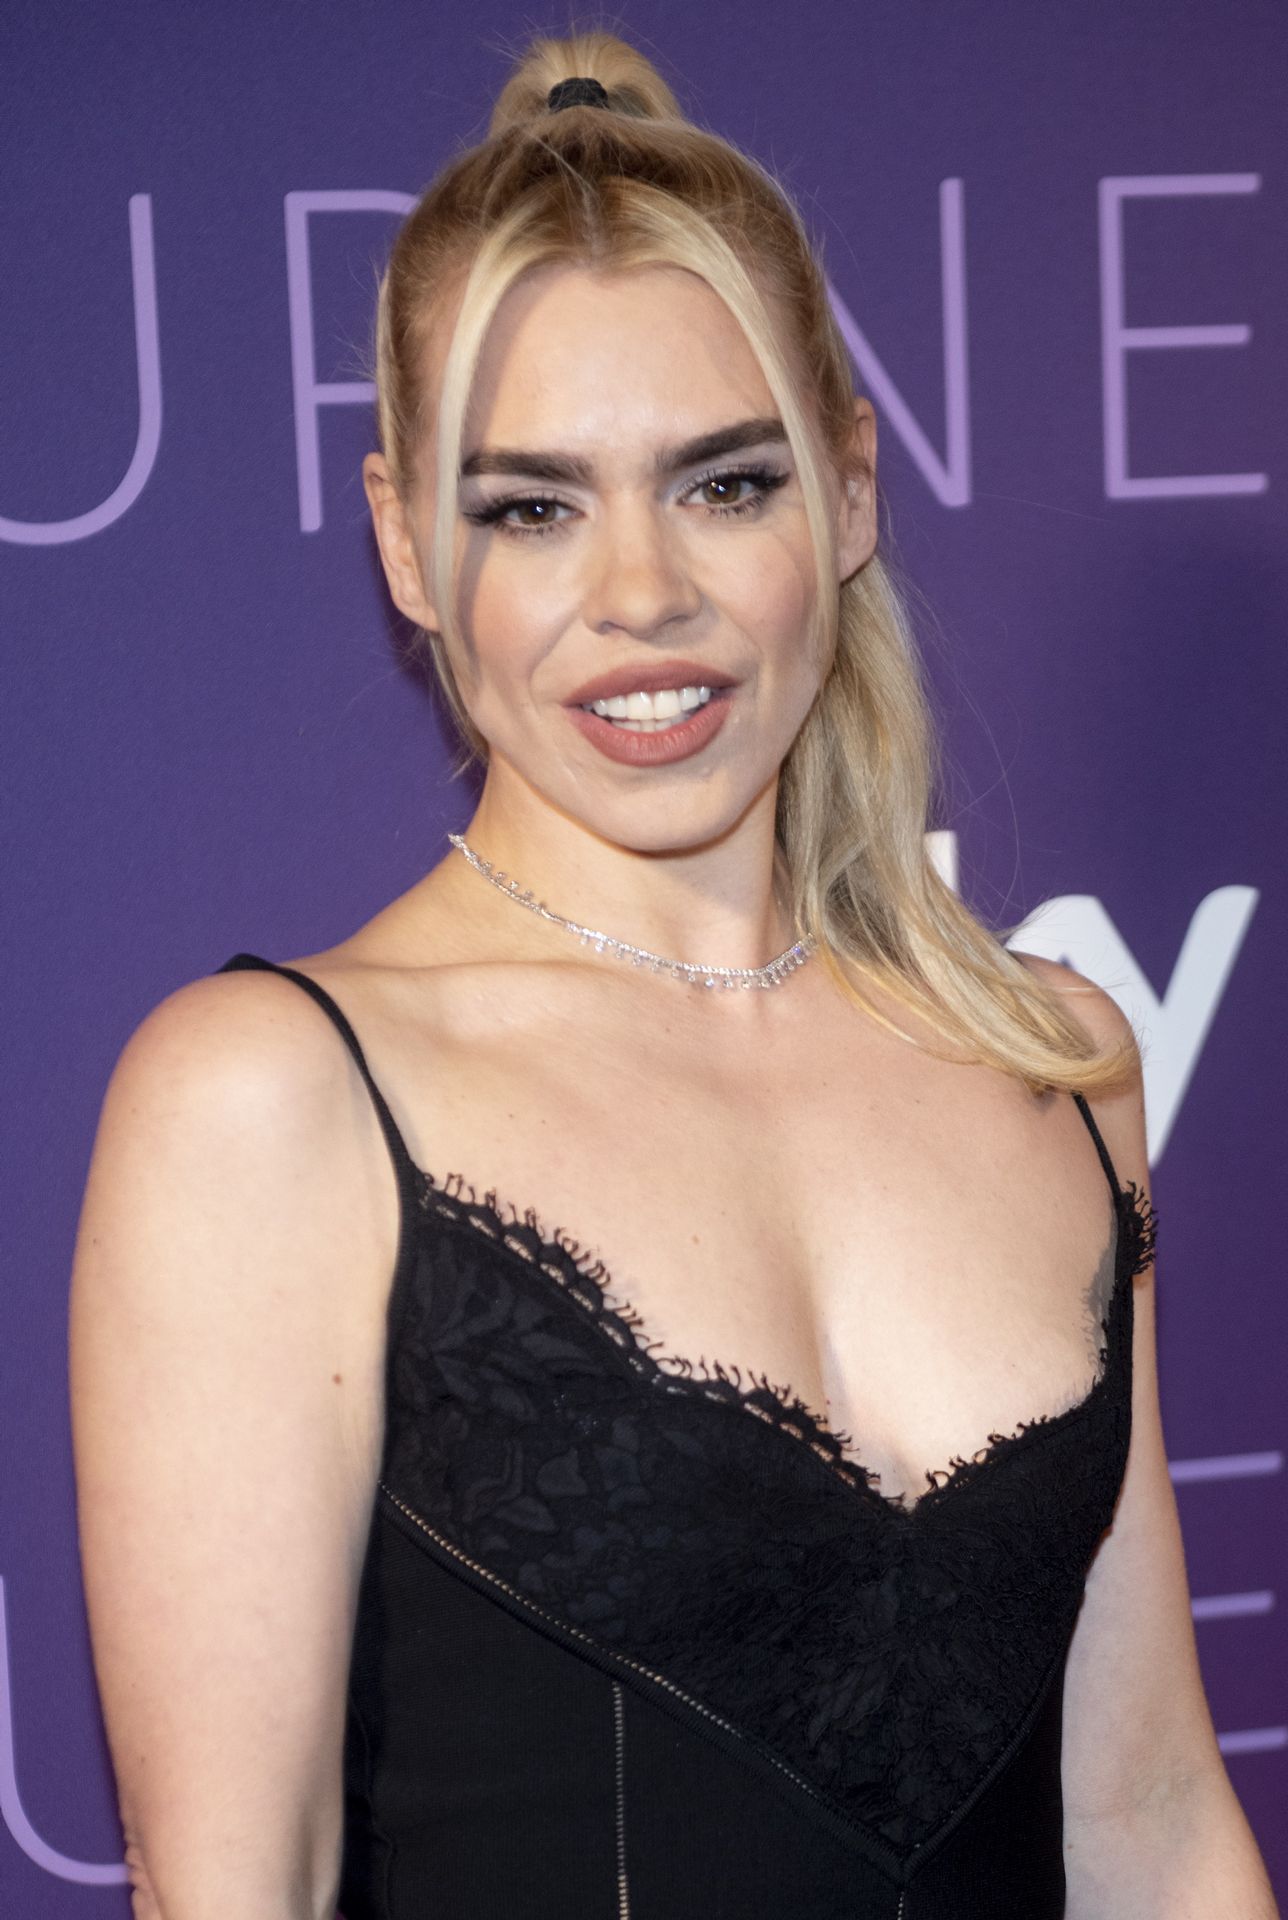 Billie Piper Smiles at the Sky Up Next Event (67 Photos)